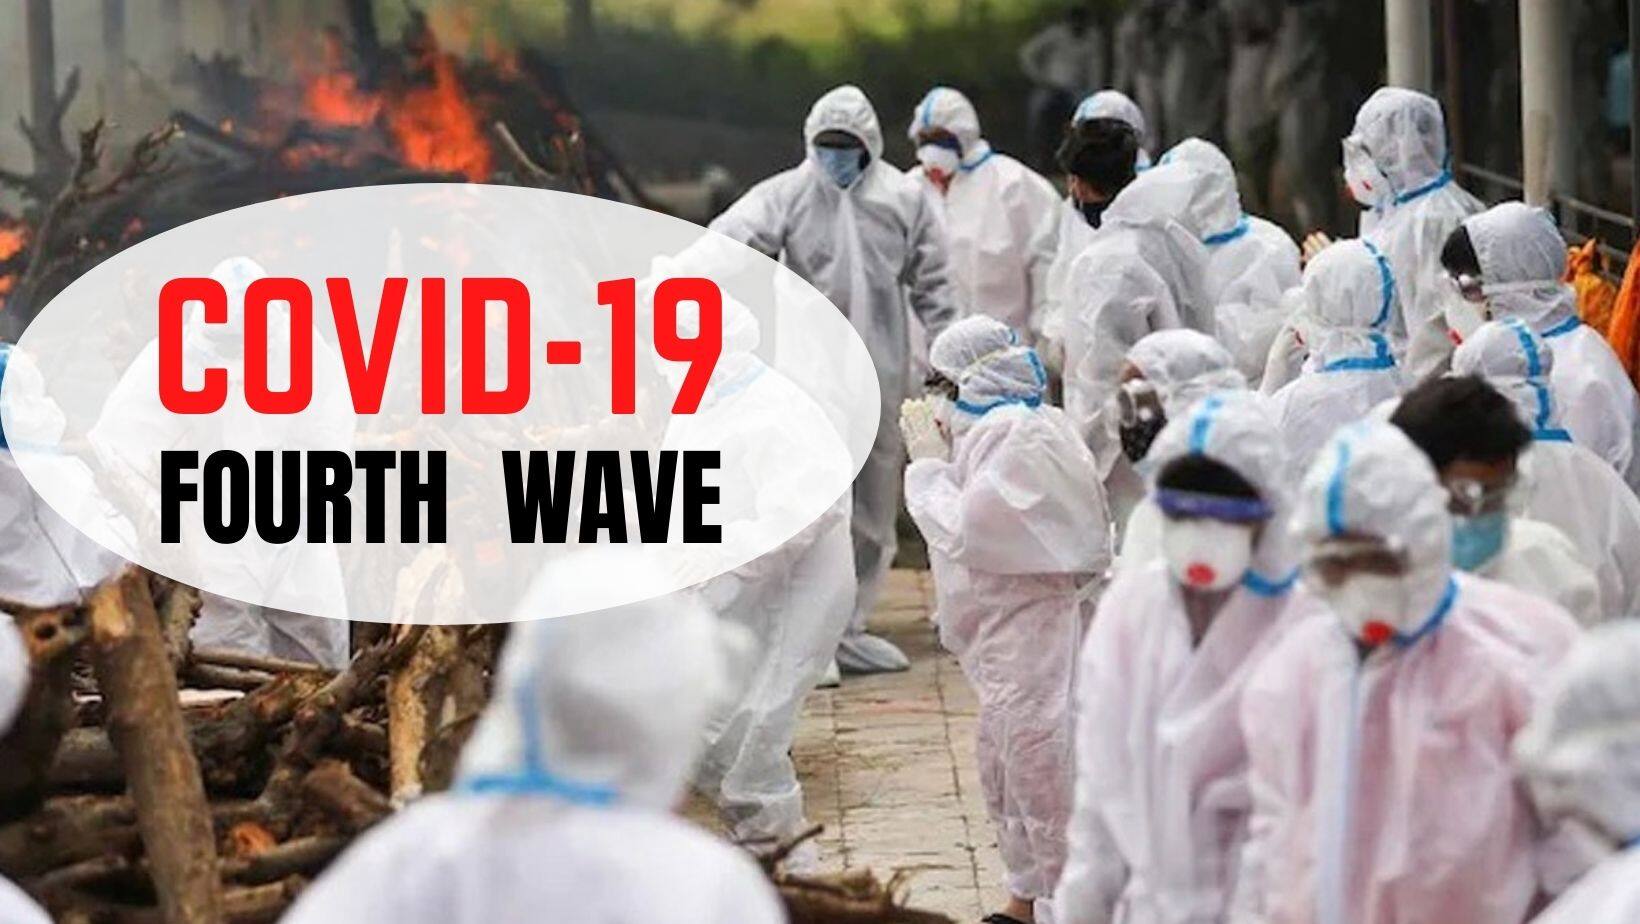 Heading Towards COVID-19 Fourth Wave? India Reports 24% Jump In Daily Cases